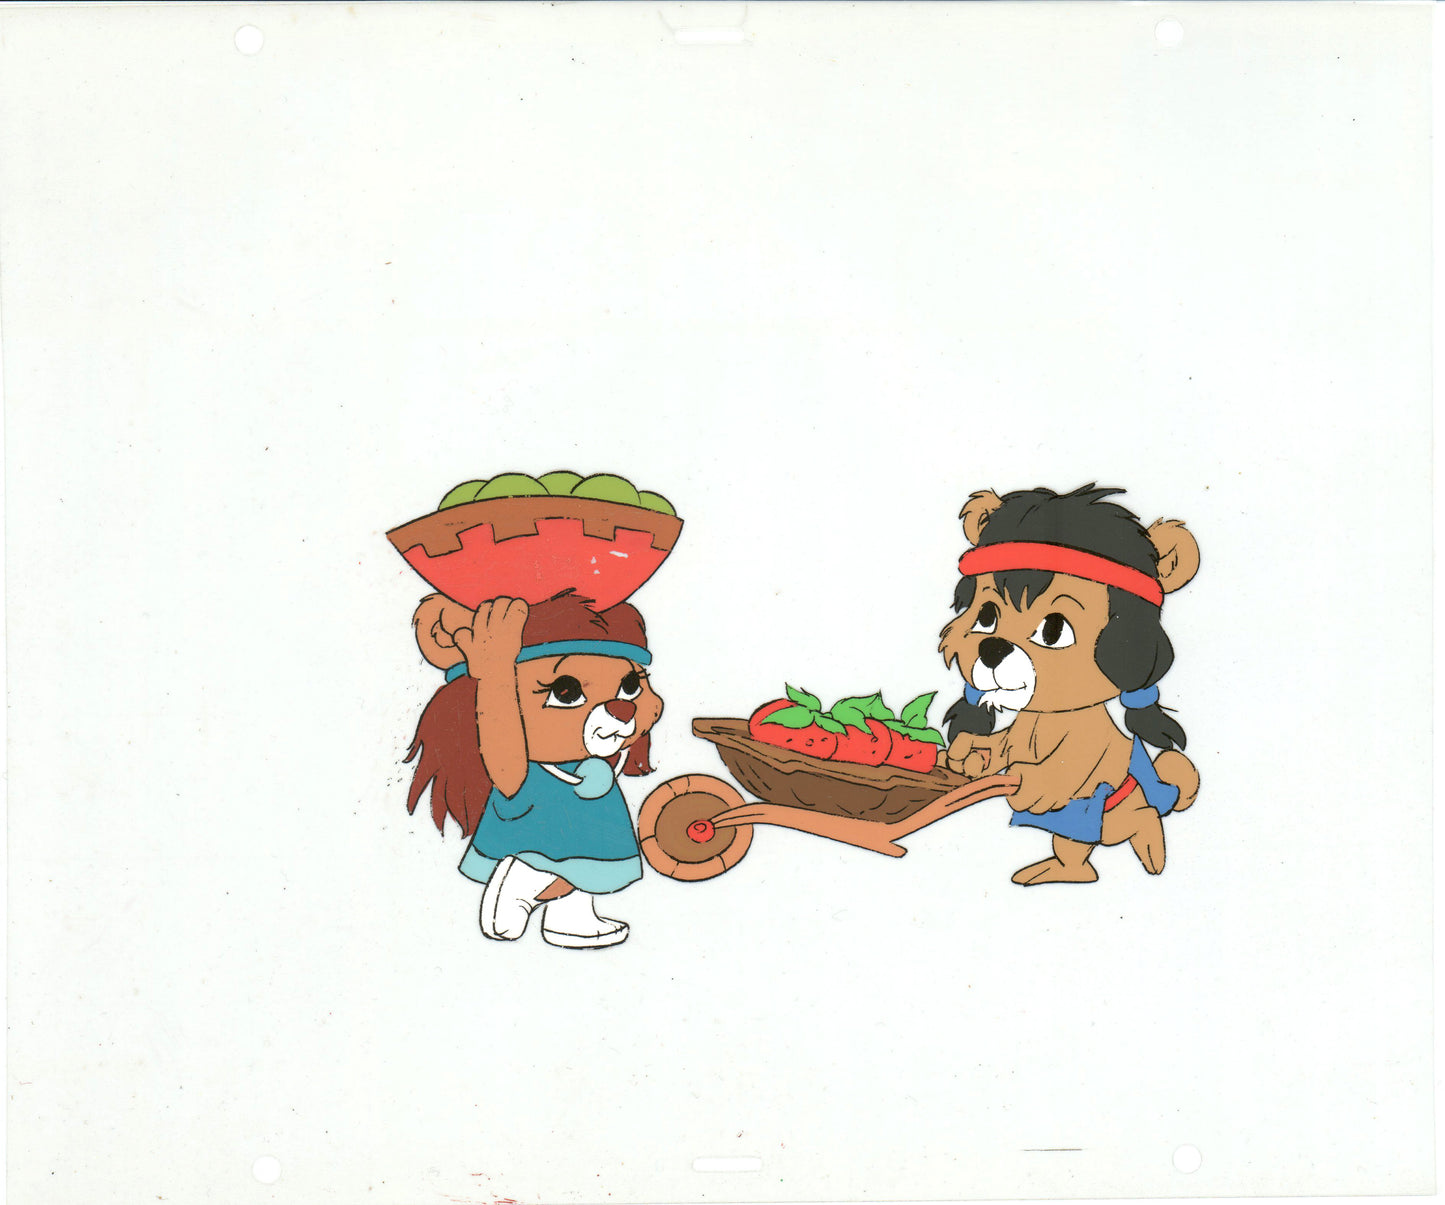 PAW PAWS Original Production Animation Cel from Hanna BARBERA 1985-6 B3106